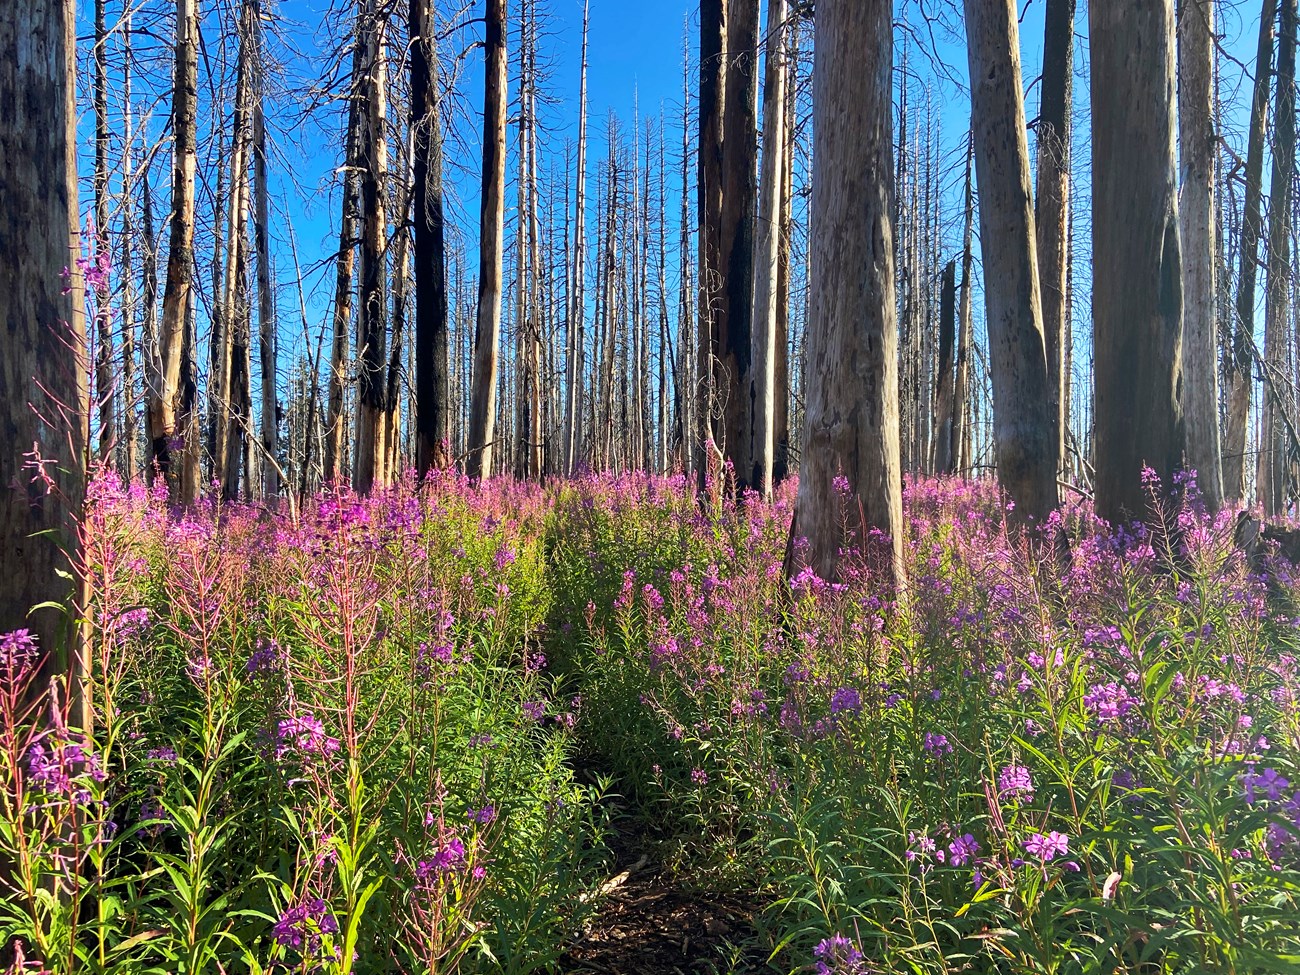 Bright pink flowers on lush green, chest-high stalks beneath a grove of charred tree trunks.